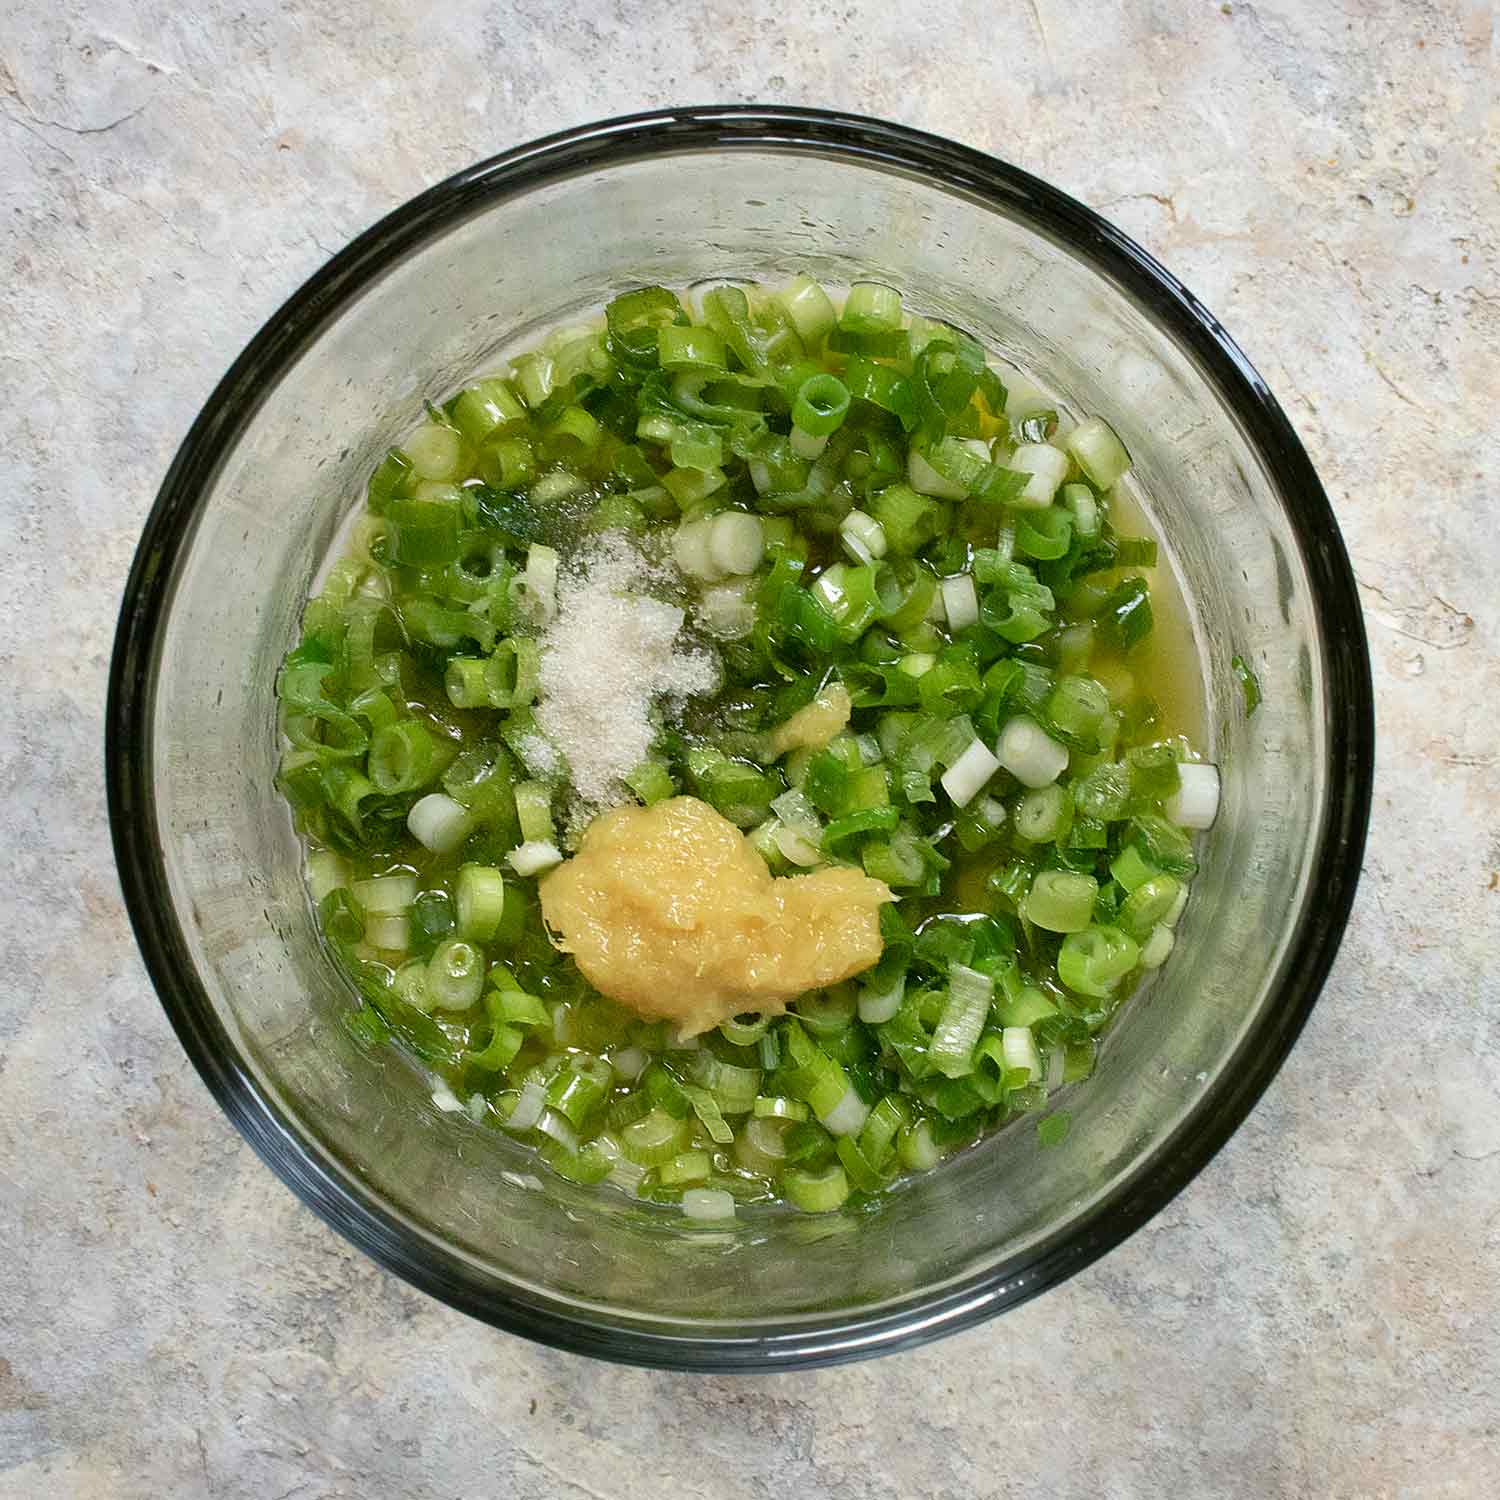 Ginger Scallion Sauce ingredients in a glass bowl.